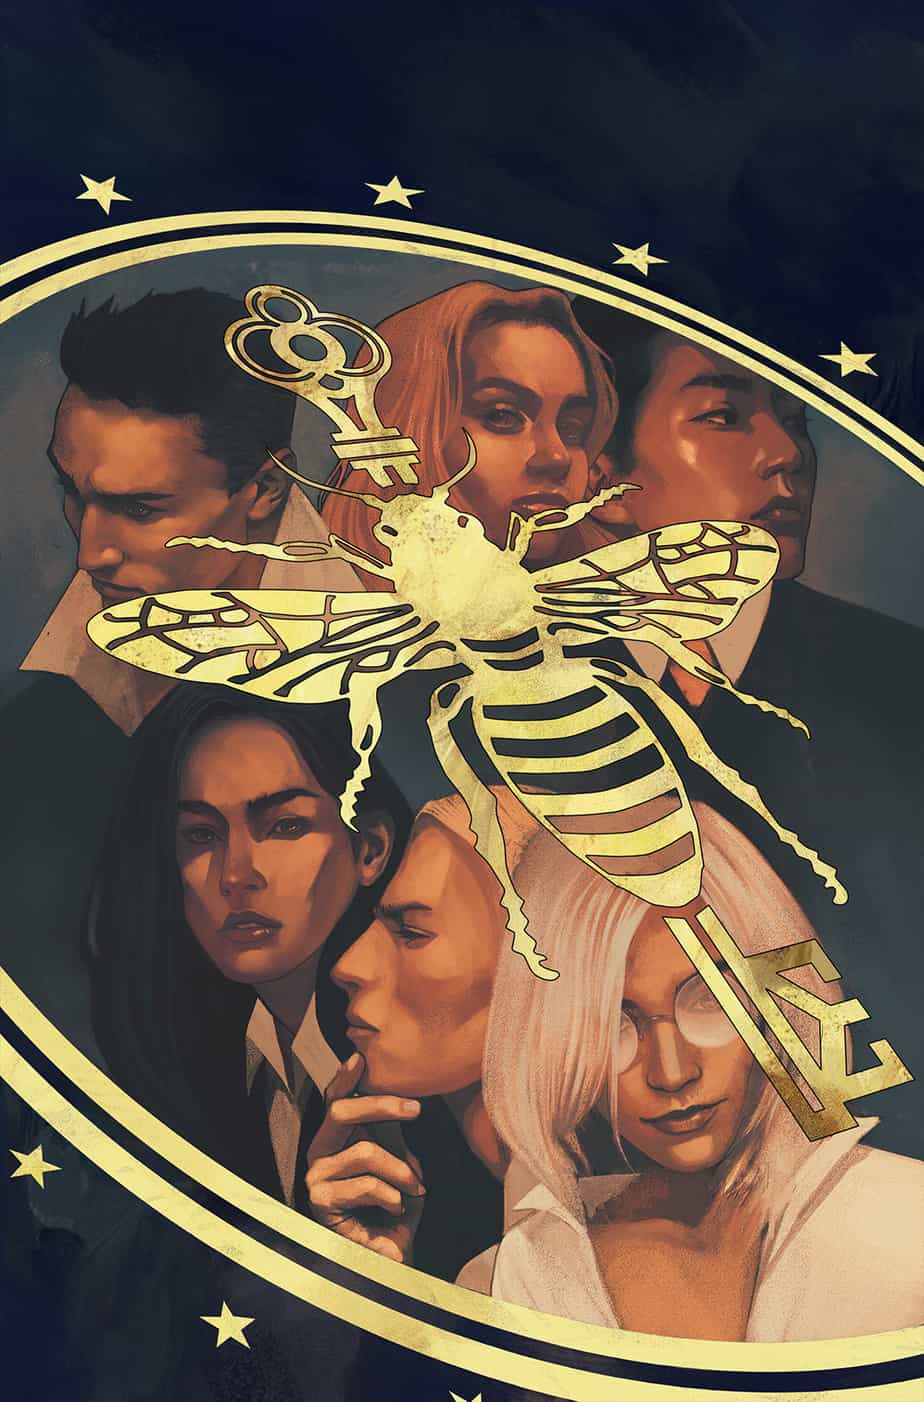 THE MAGICIANS #1 - Main Cover